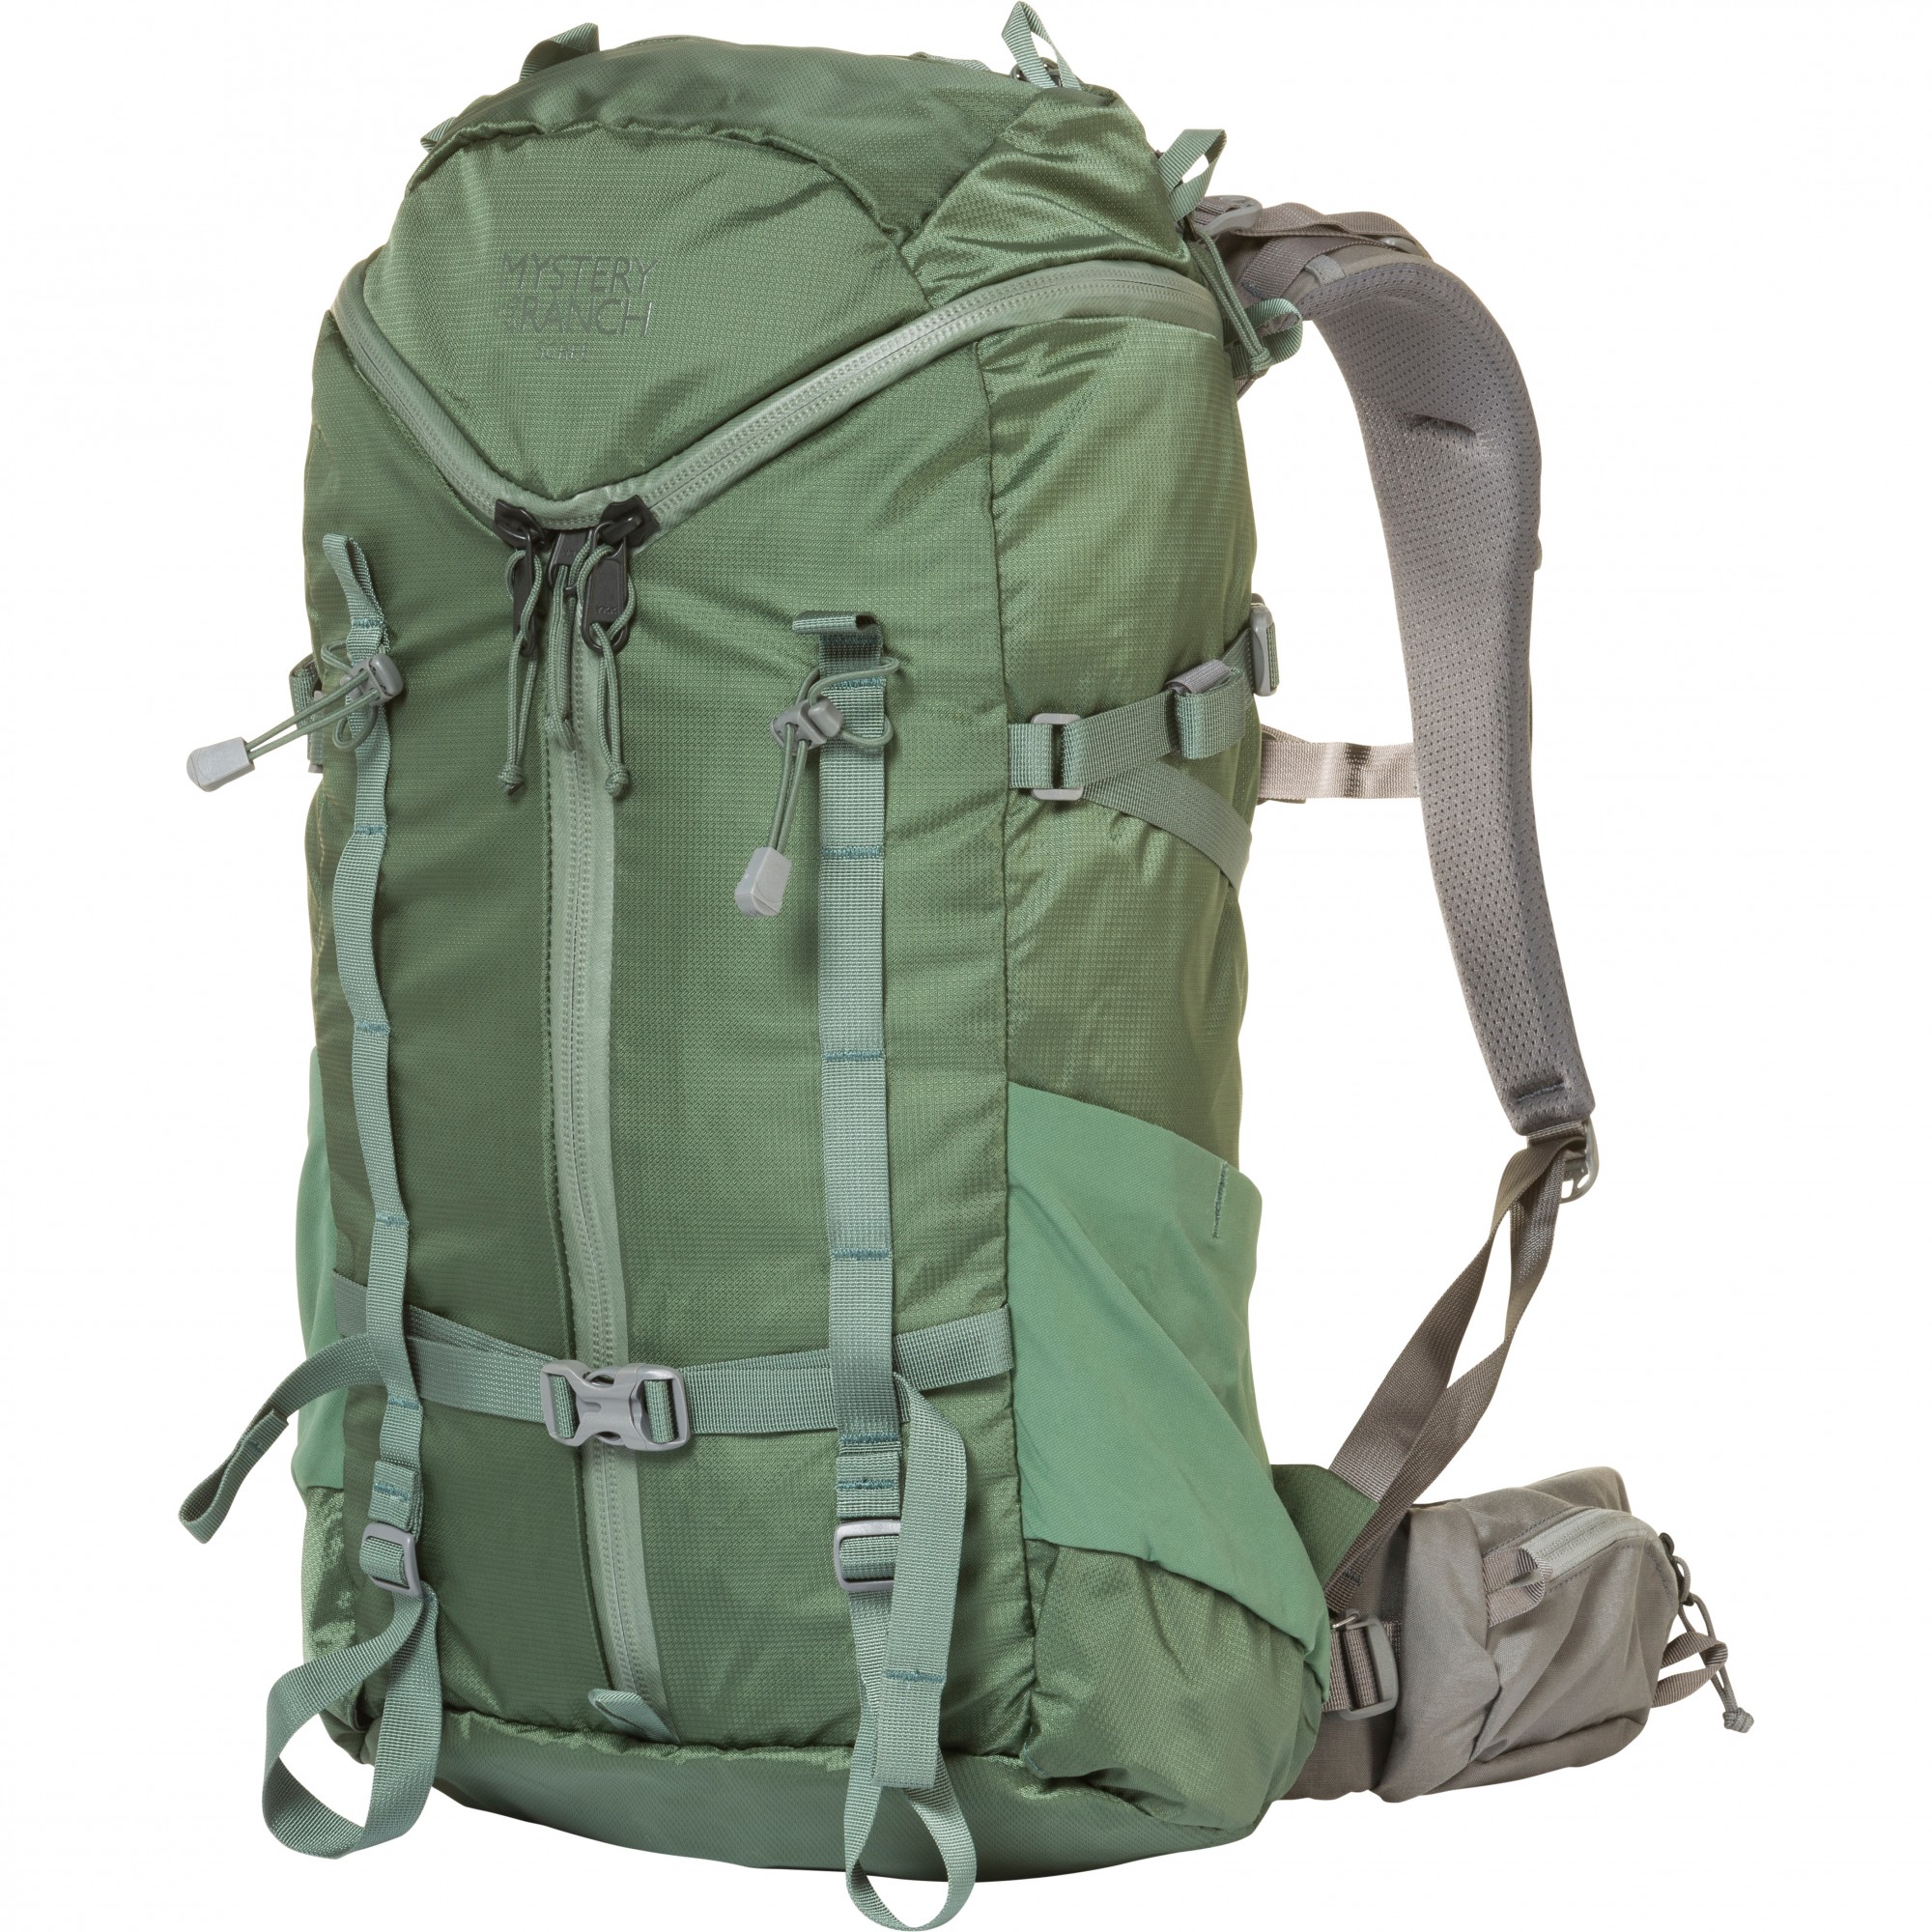 Mystery Ranch Scree 32L Backpack Review: The Versatile Daypack